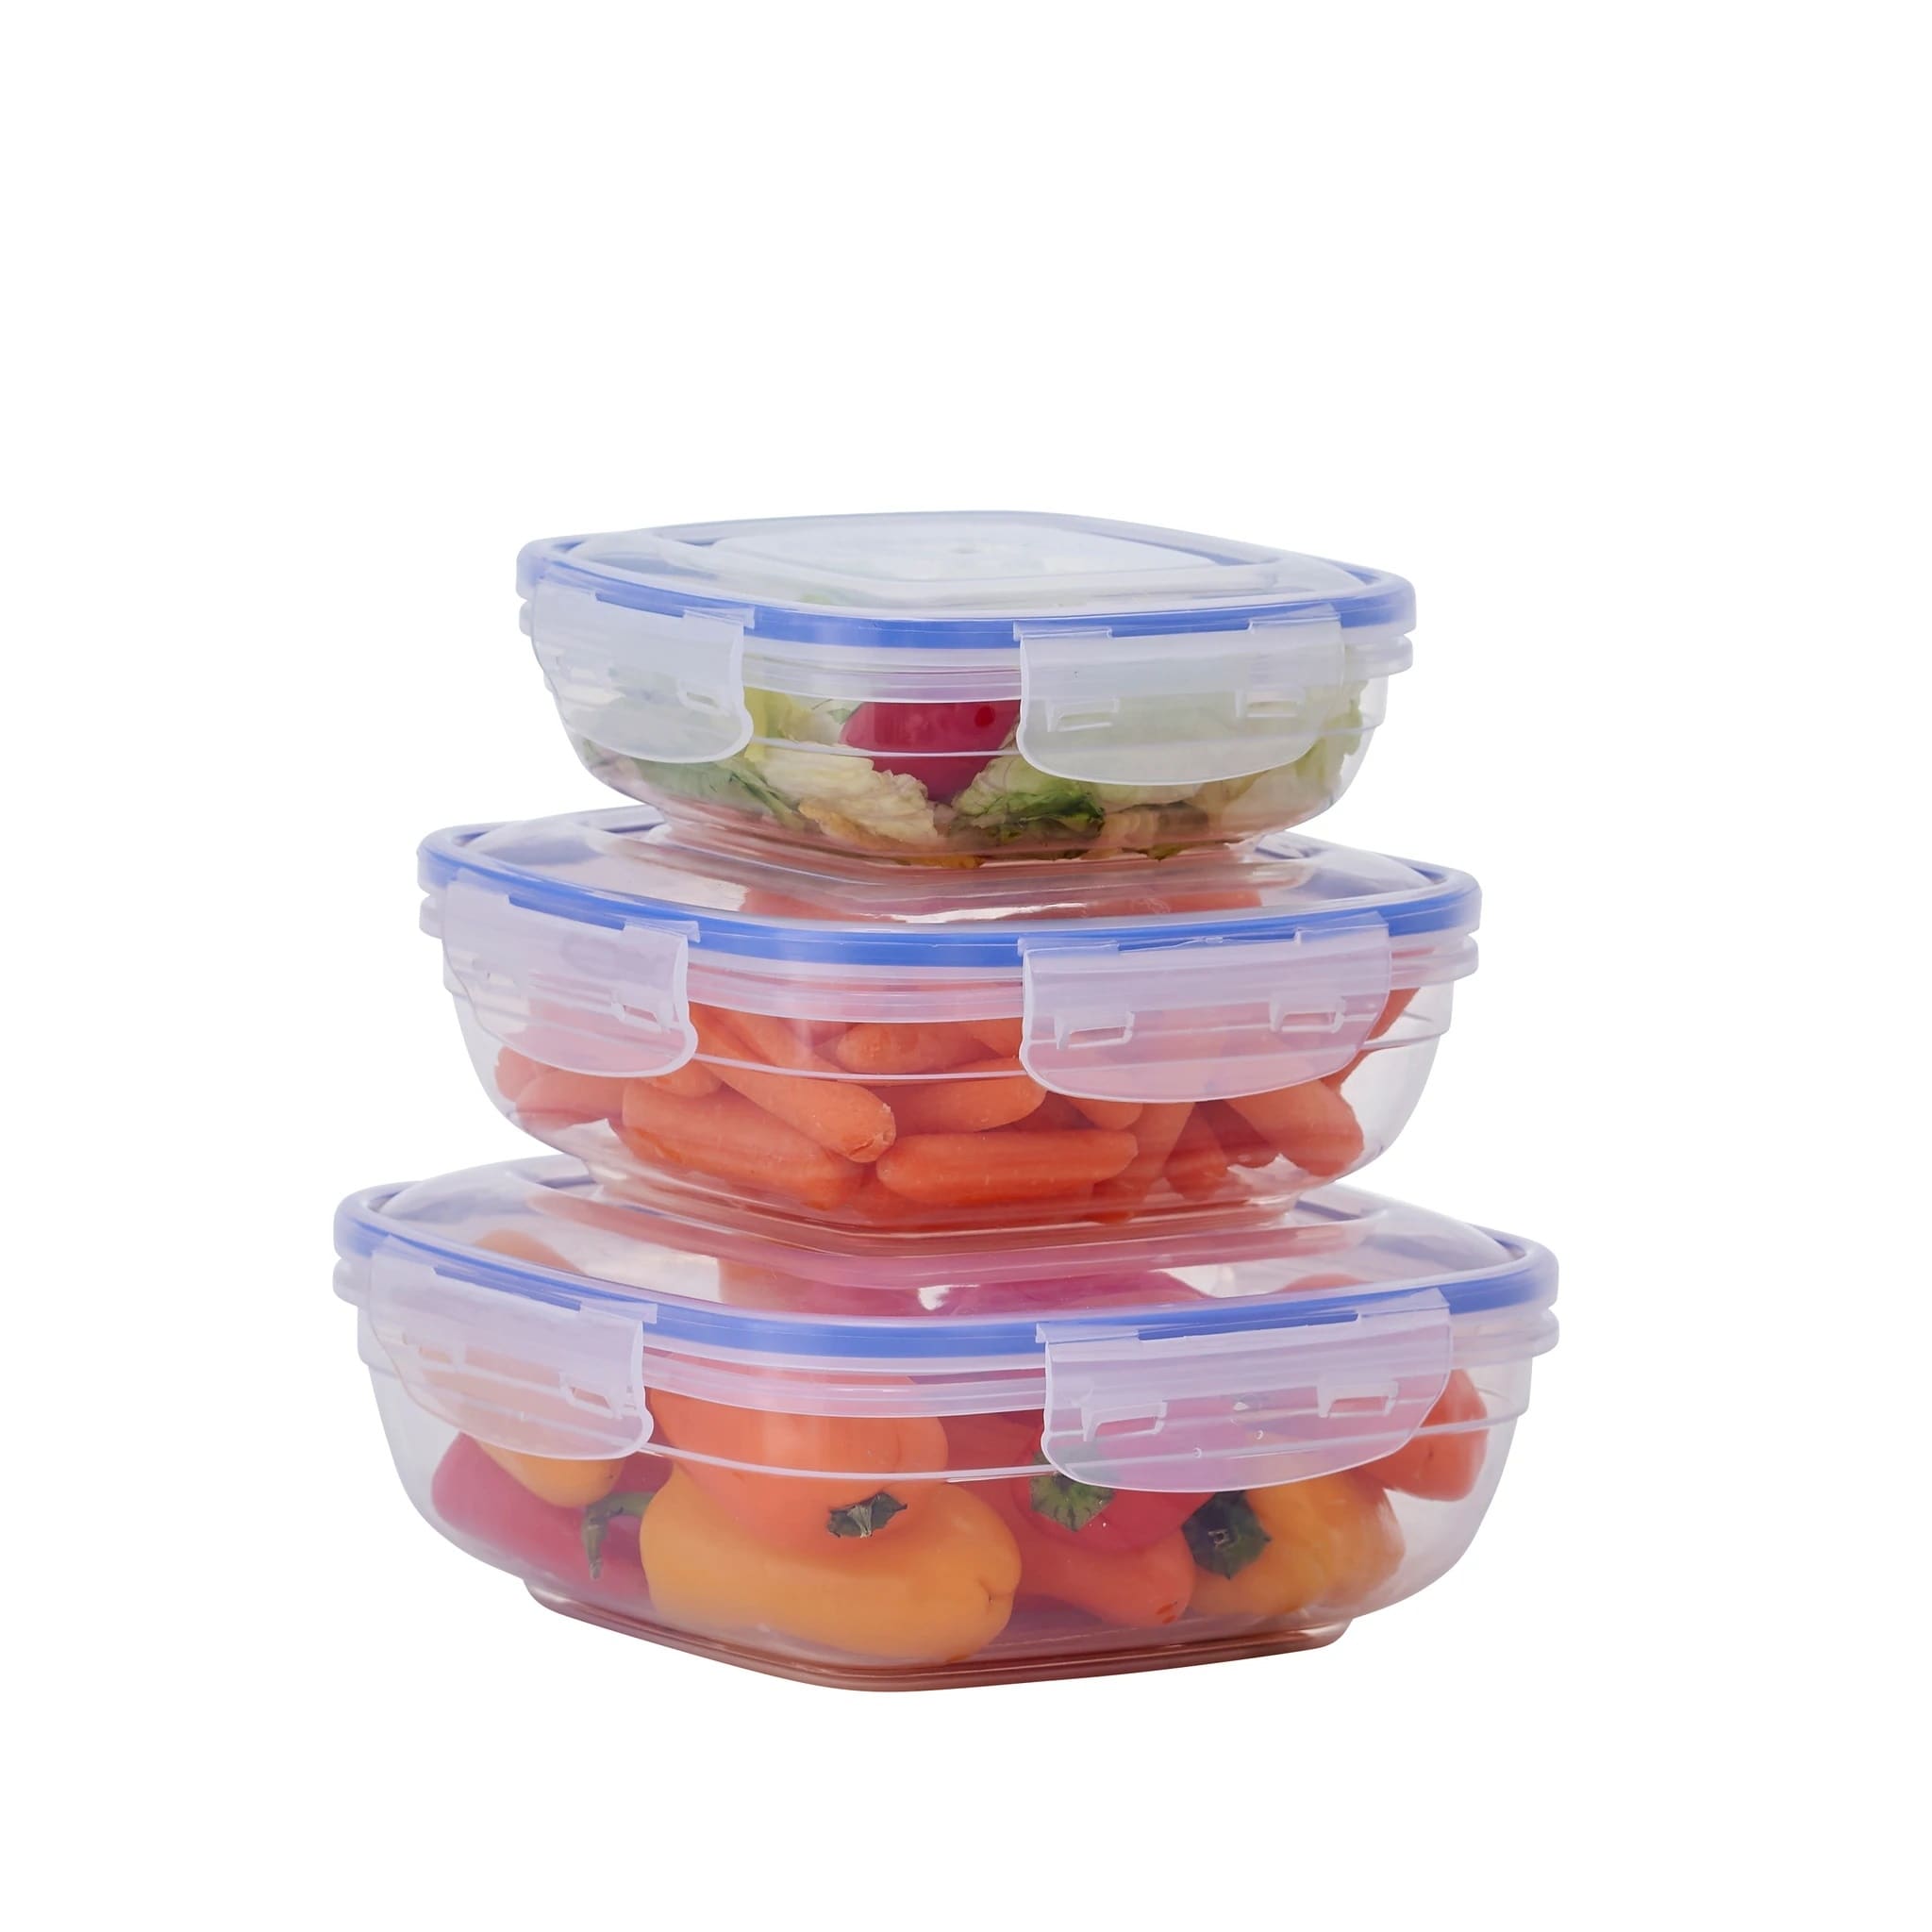 https://ak1.ostkcdn.com/images/products/is/images/direct/50b82ca3a7b906af144fbbdbe8d101d9ca12ad2a/3-Pack-Shallow-Square-Sealed-Containers.jpg